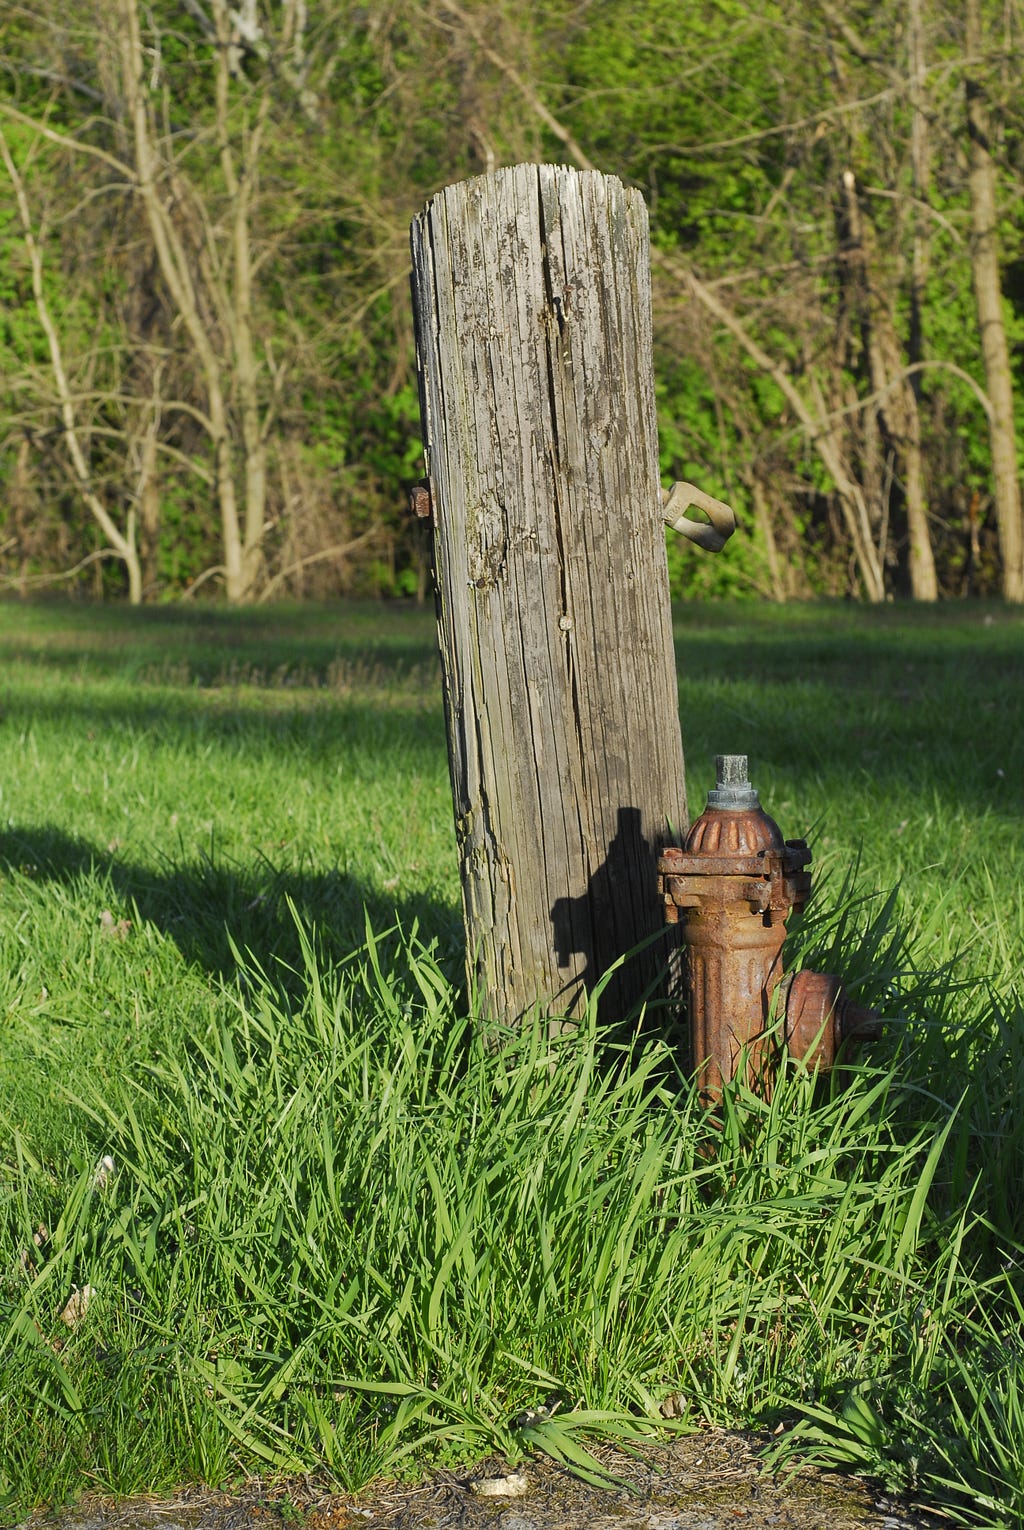 Small fire hydrant next to a post in a field